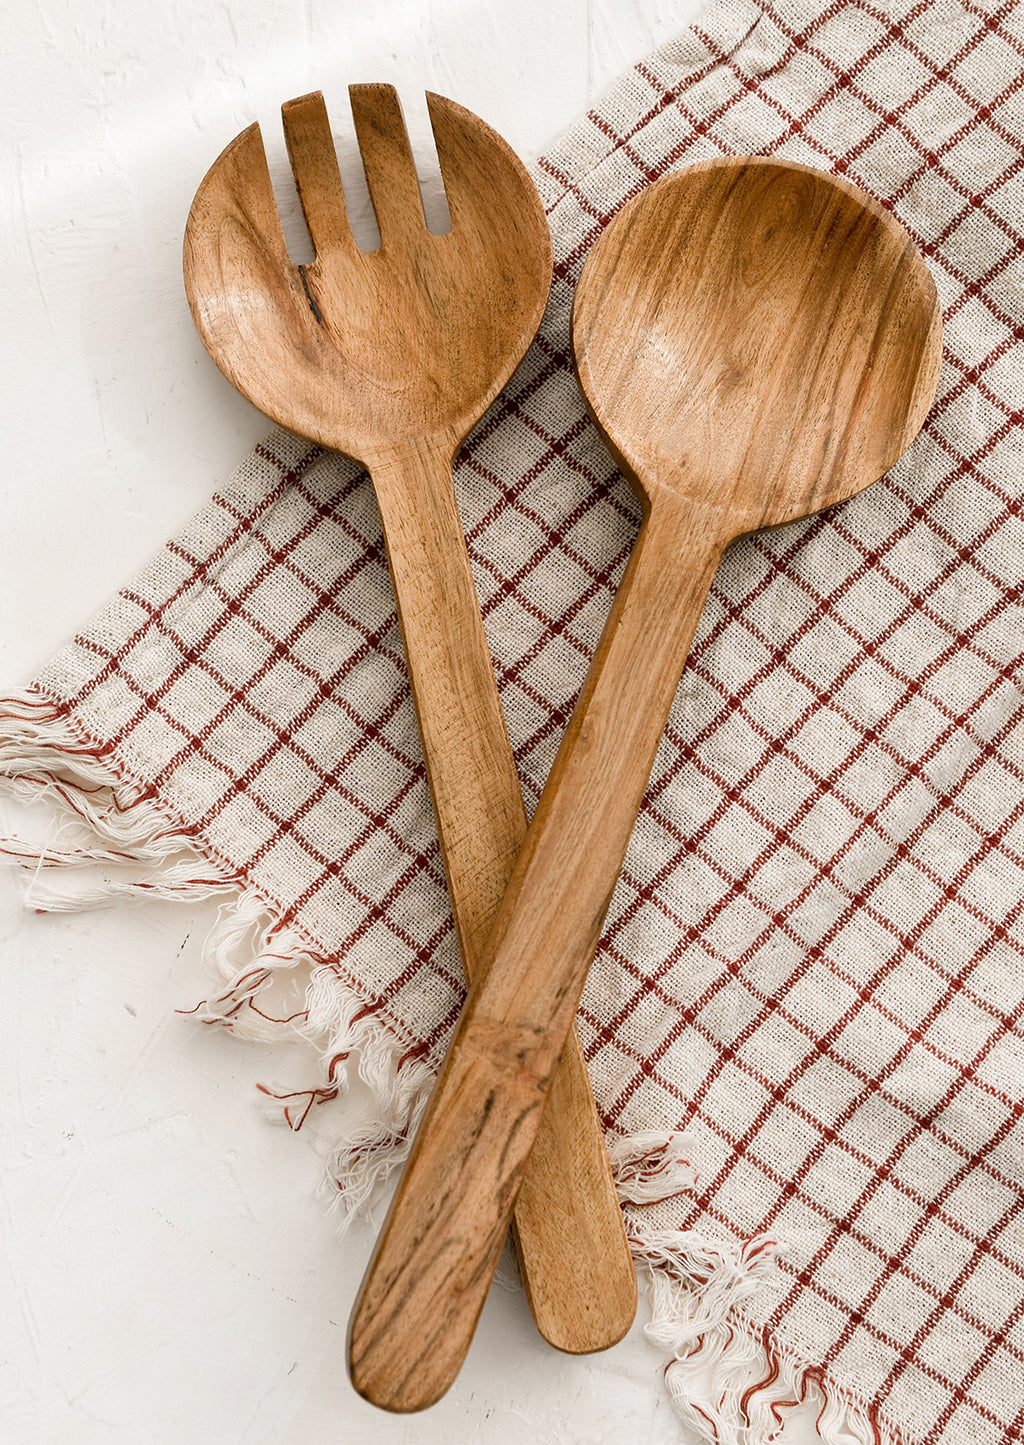 4: A pair of acacia wood salad servers with simple, plain design.